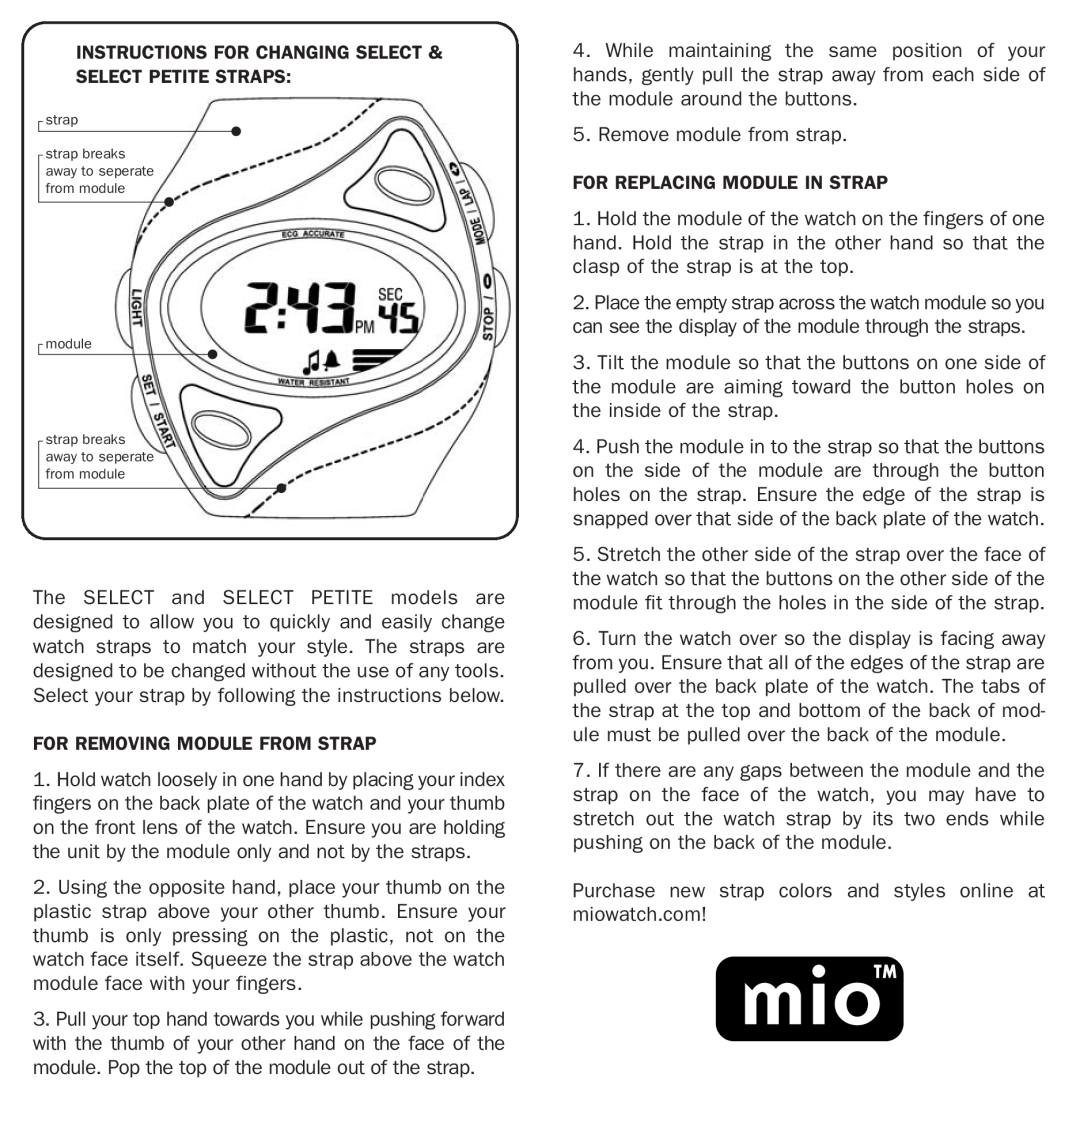 Mio manual Instructions For Changing Select & Select Petite Straps 